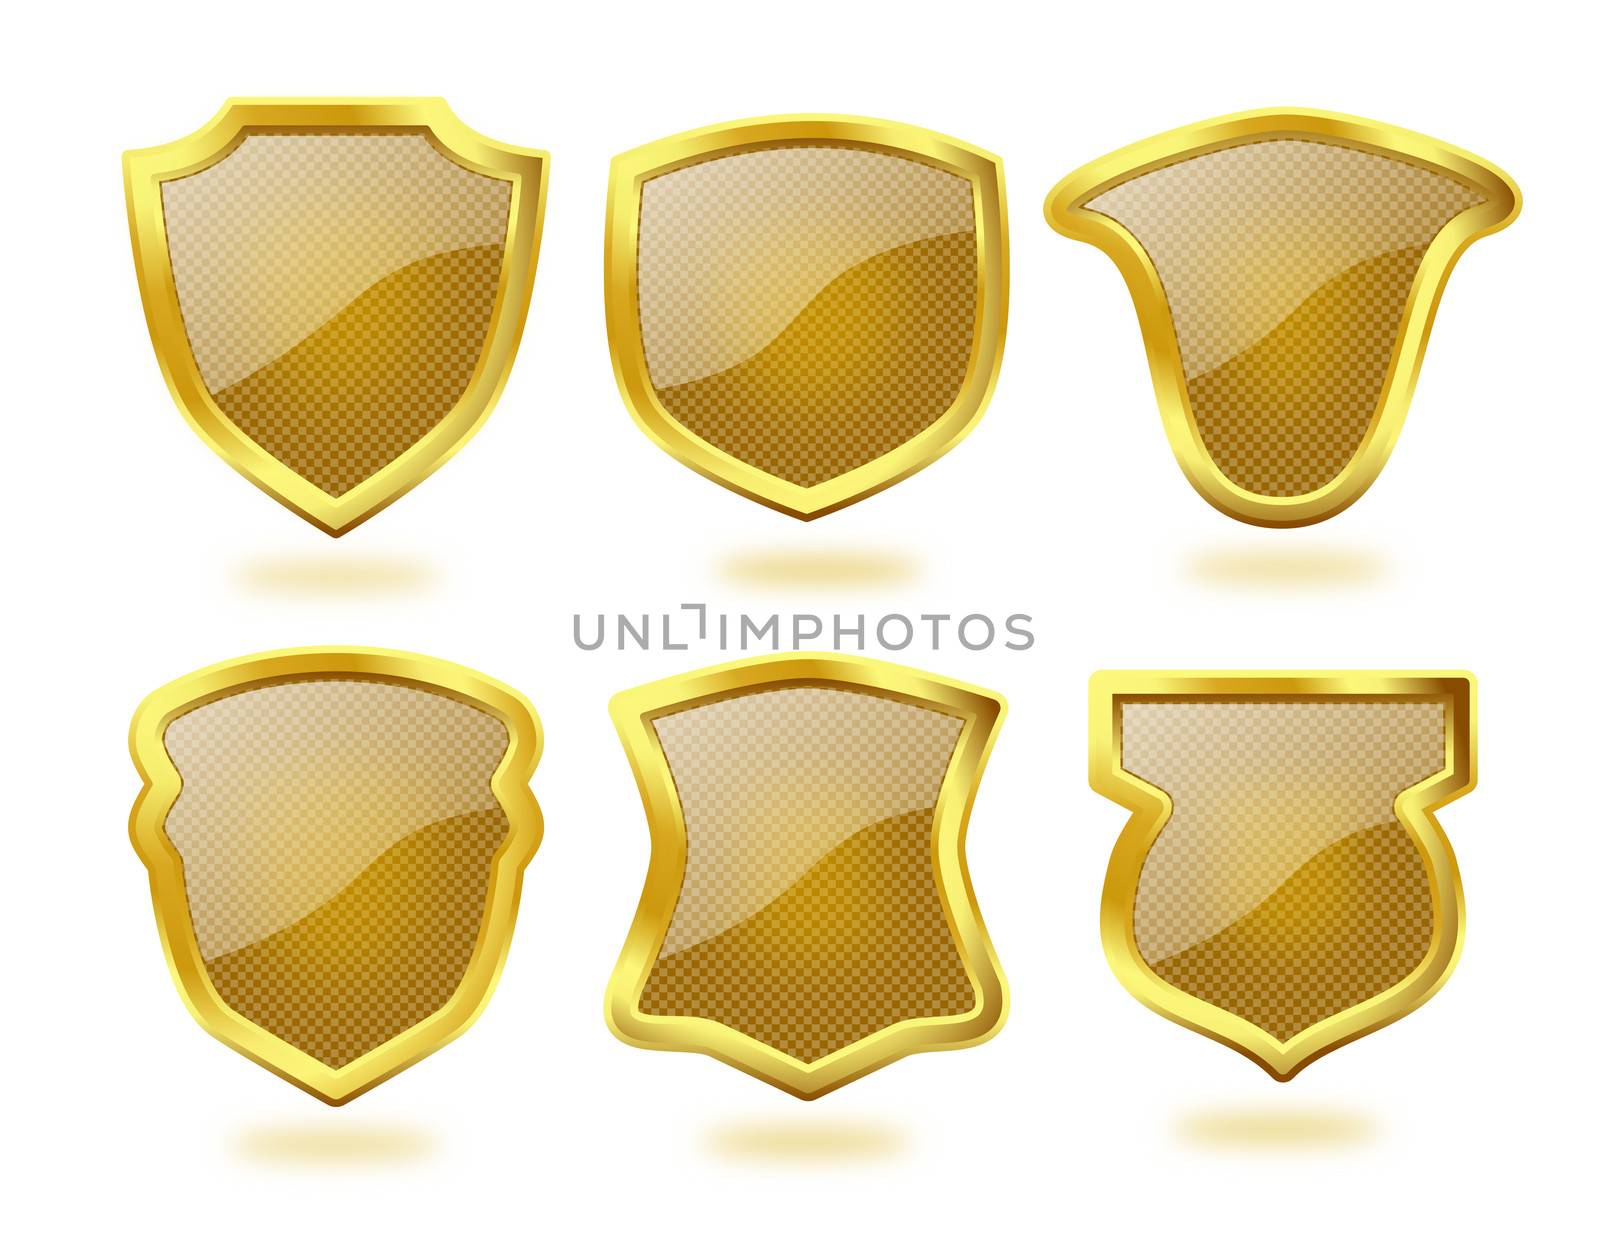 Shiny Golden Shields with Brown Check Pattern by RichieThakur